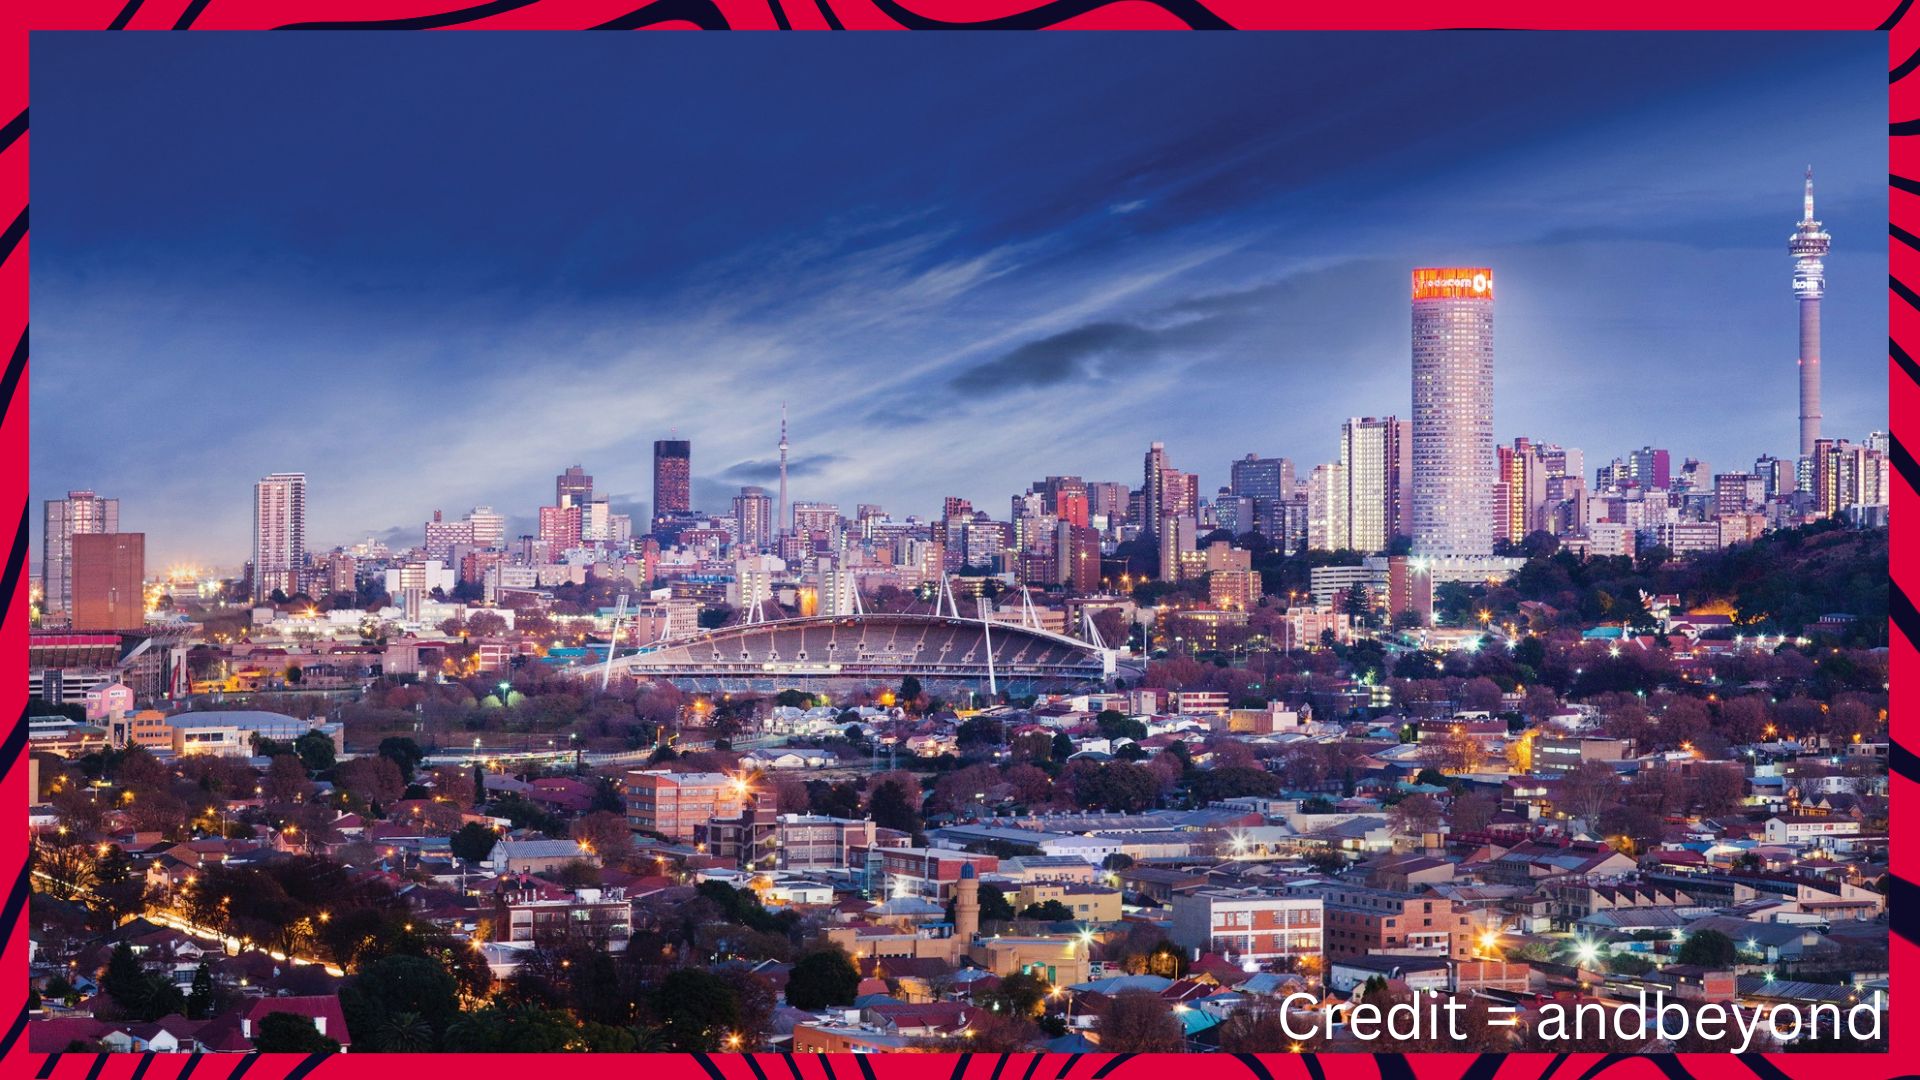 Johannesburg is the 3rd most popular city in Africa.